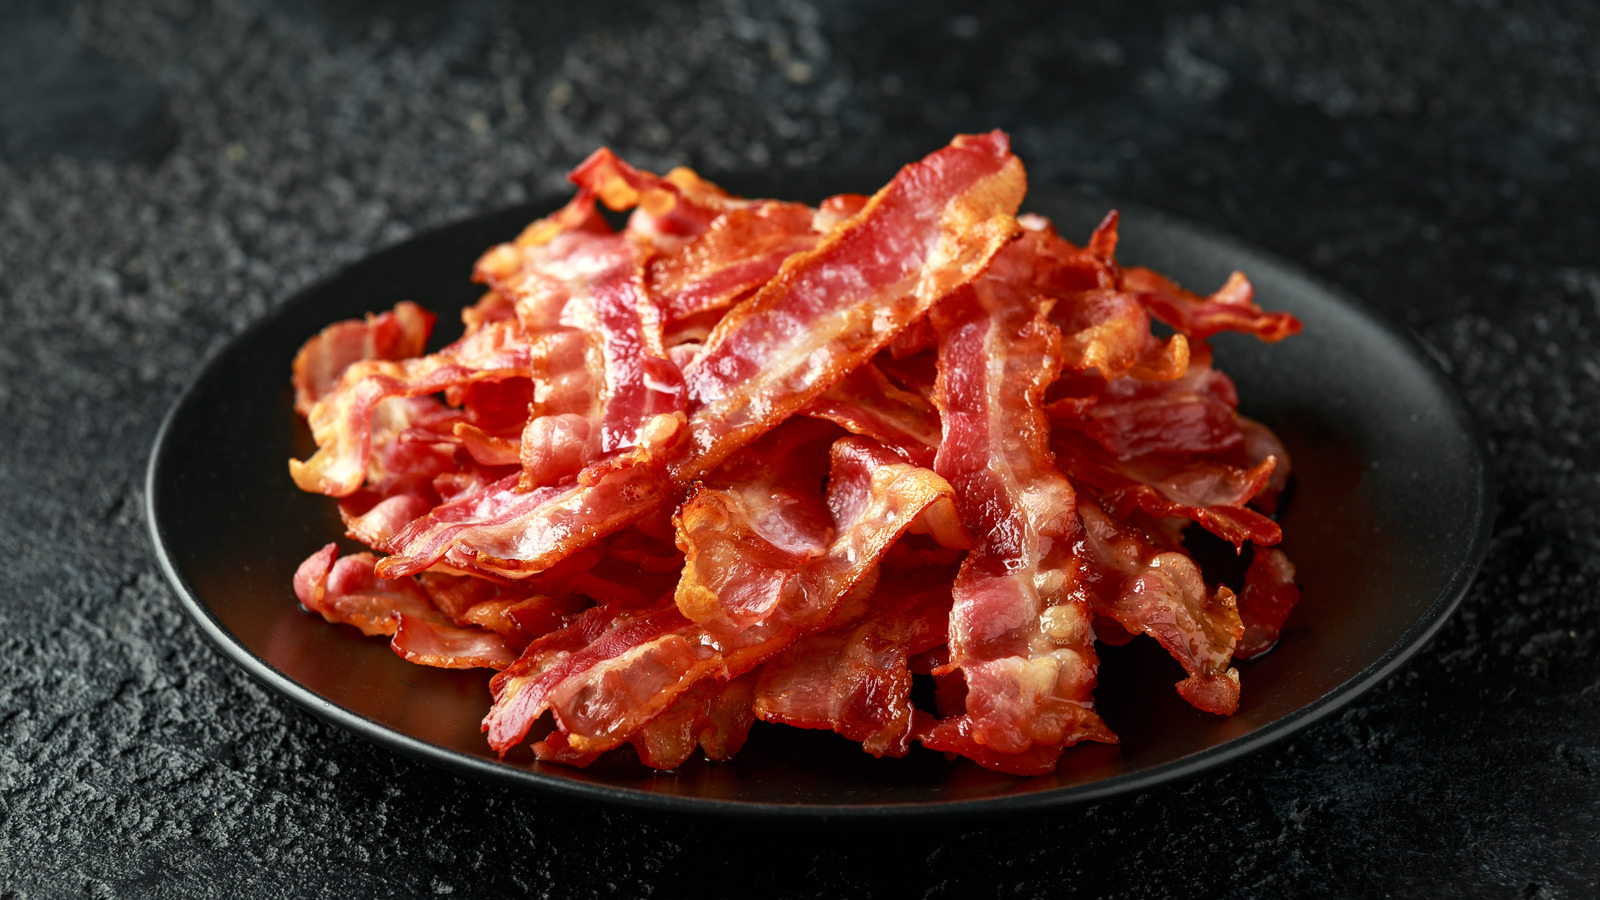 https://www.tastingtable.com/img/gallery/the-bowl-trick-for-shatteringly-crisp-bacon-in-the-microwave/l-intro-1681044887.jpg